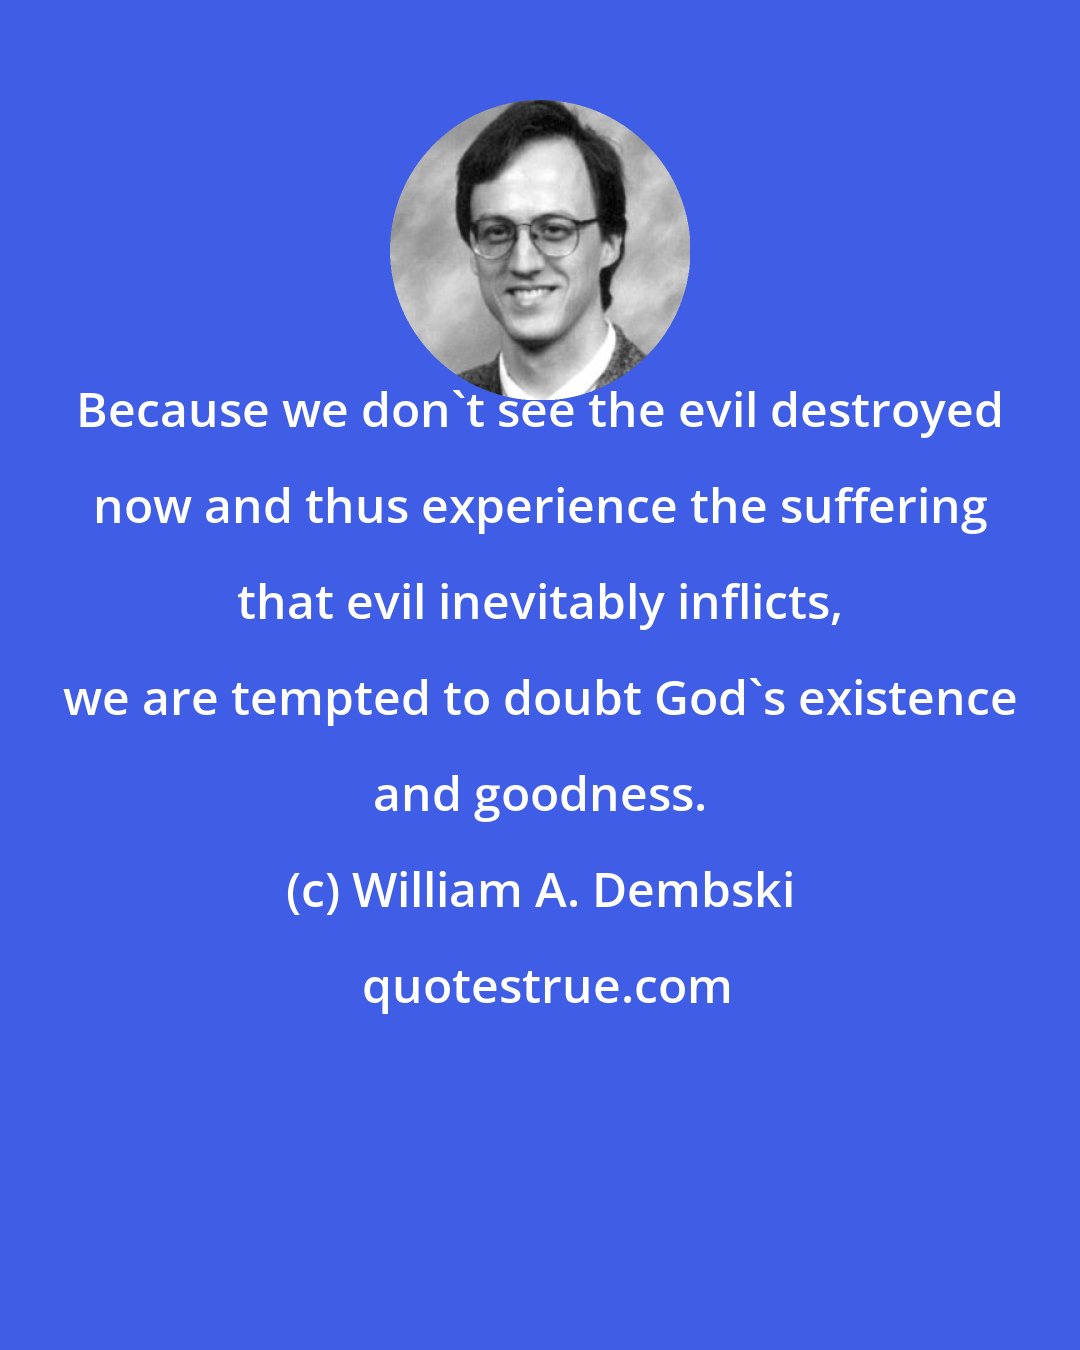 William A. Dembski: Because we don't see the evil destroyed now and thus experience the suffering that evil inevitably inflicts, we are tempted to doubt God's existence and goodness.